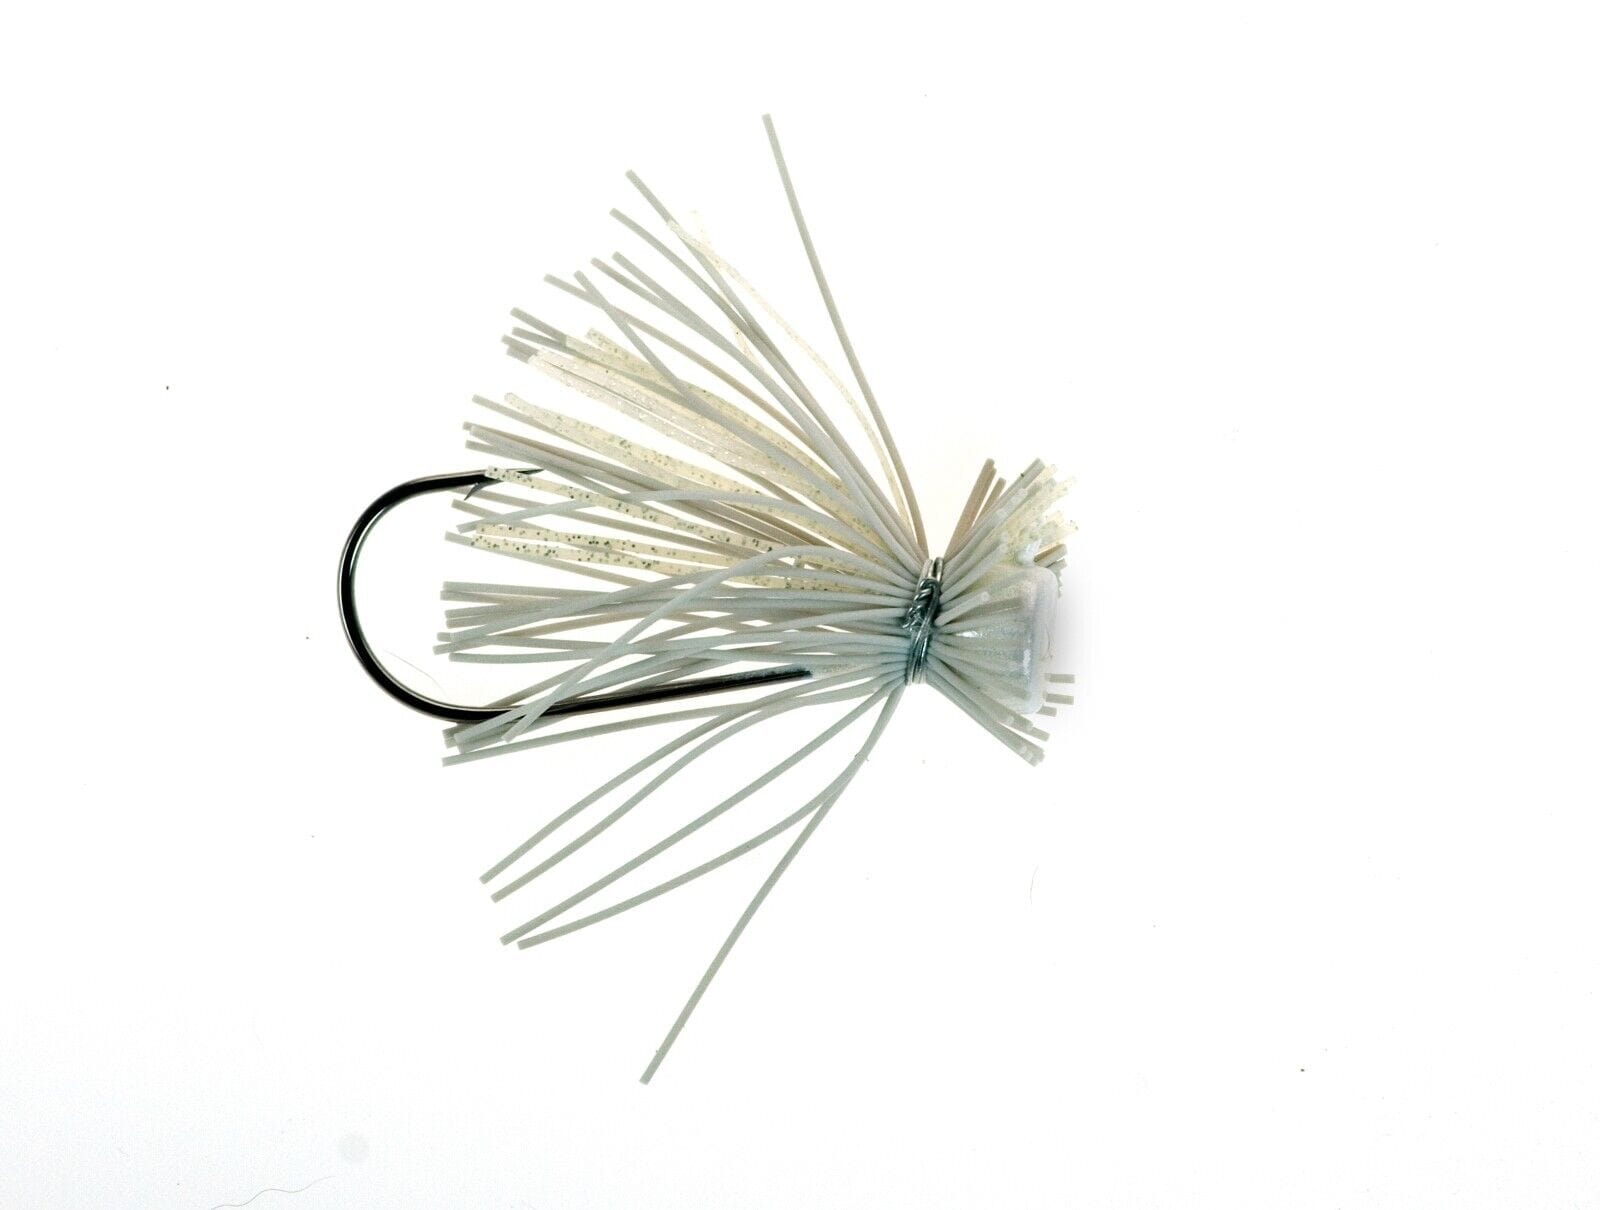 Buckeye Lures Spot Remover Finesse Jig - White